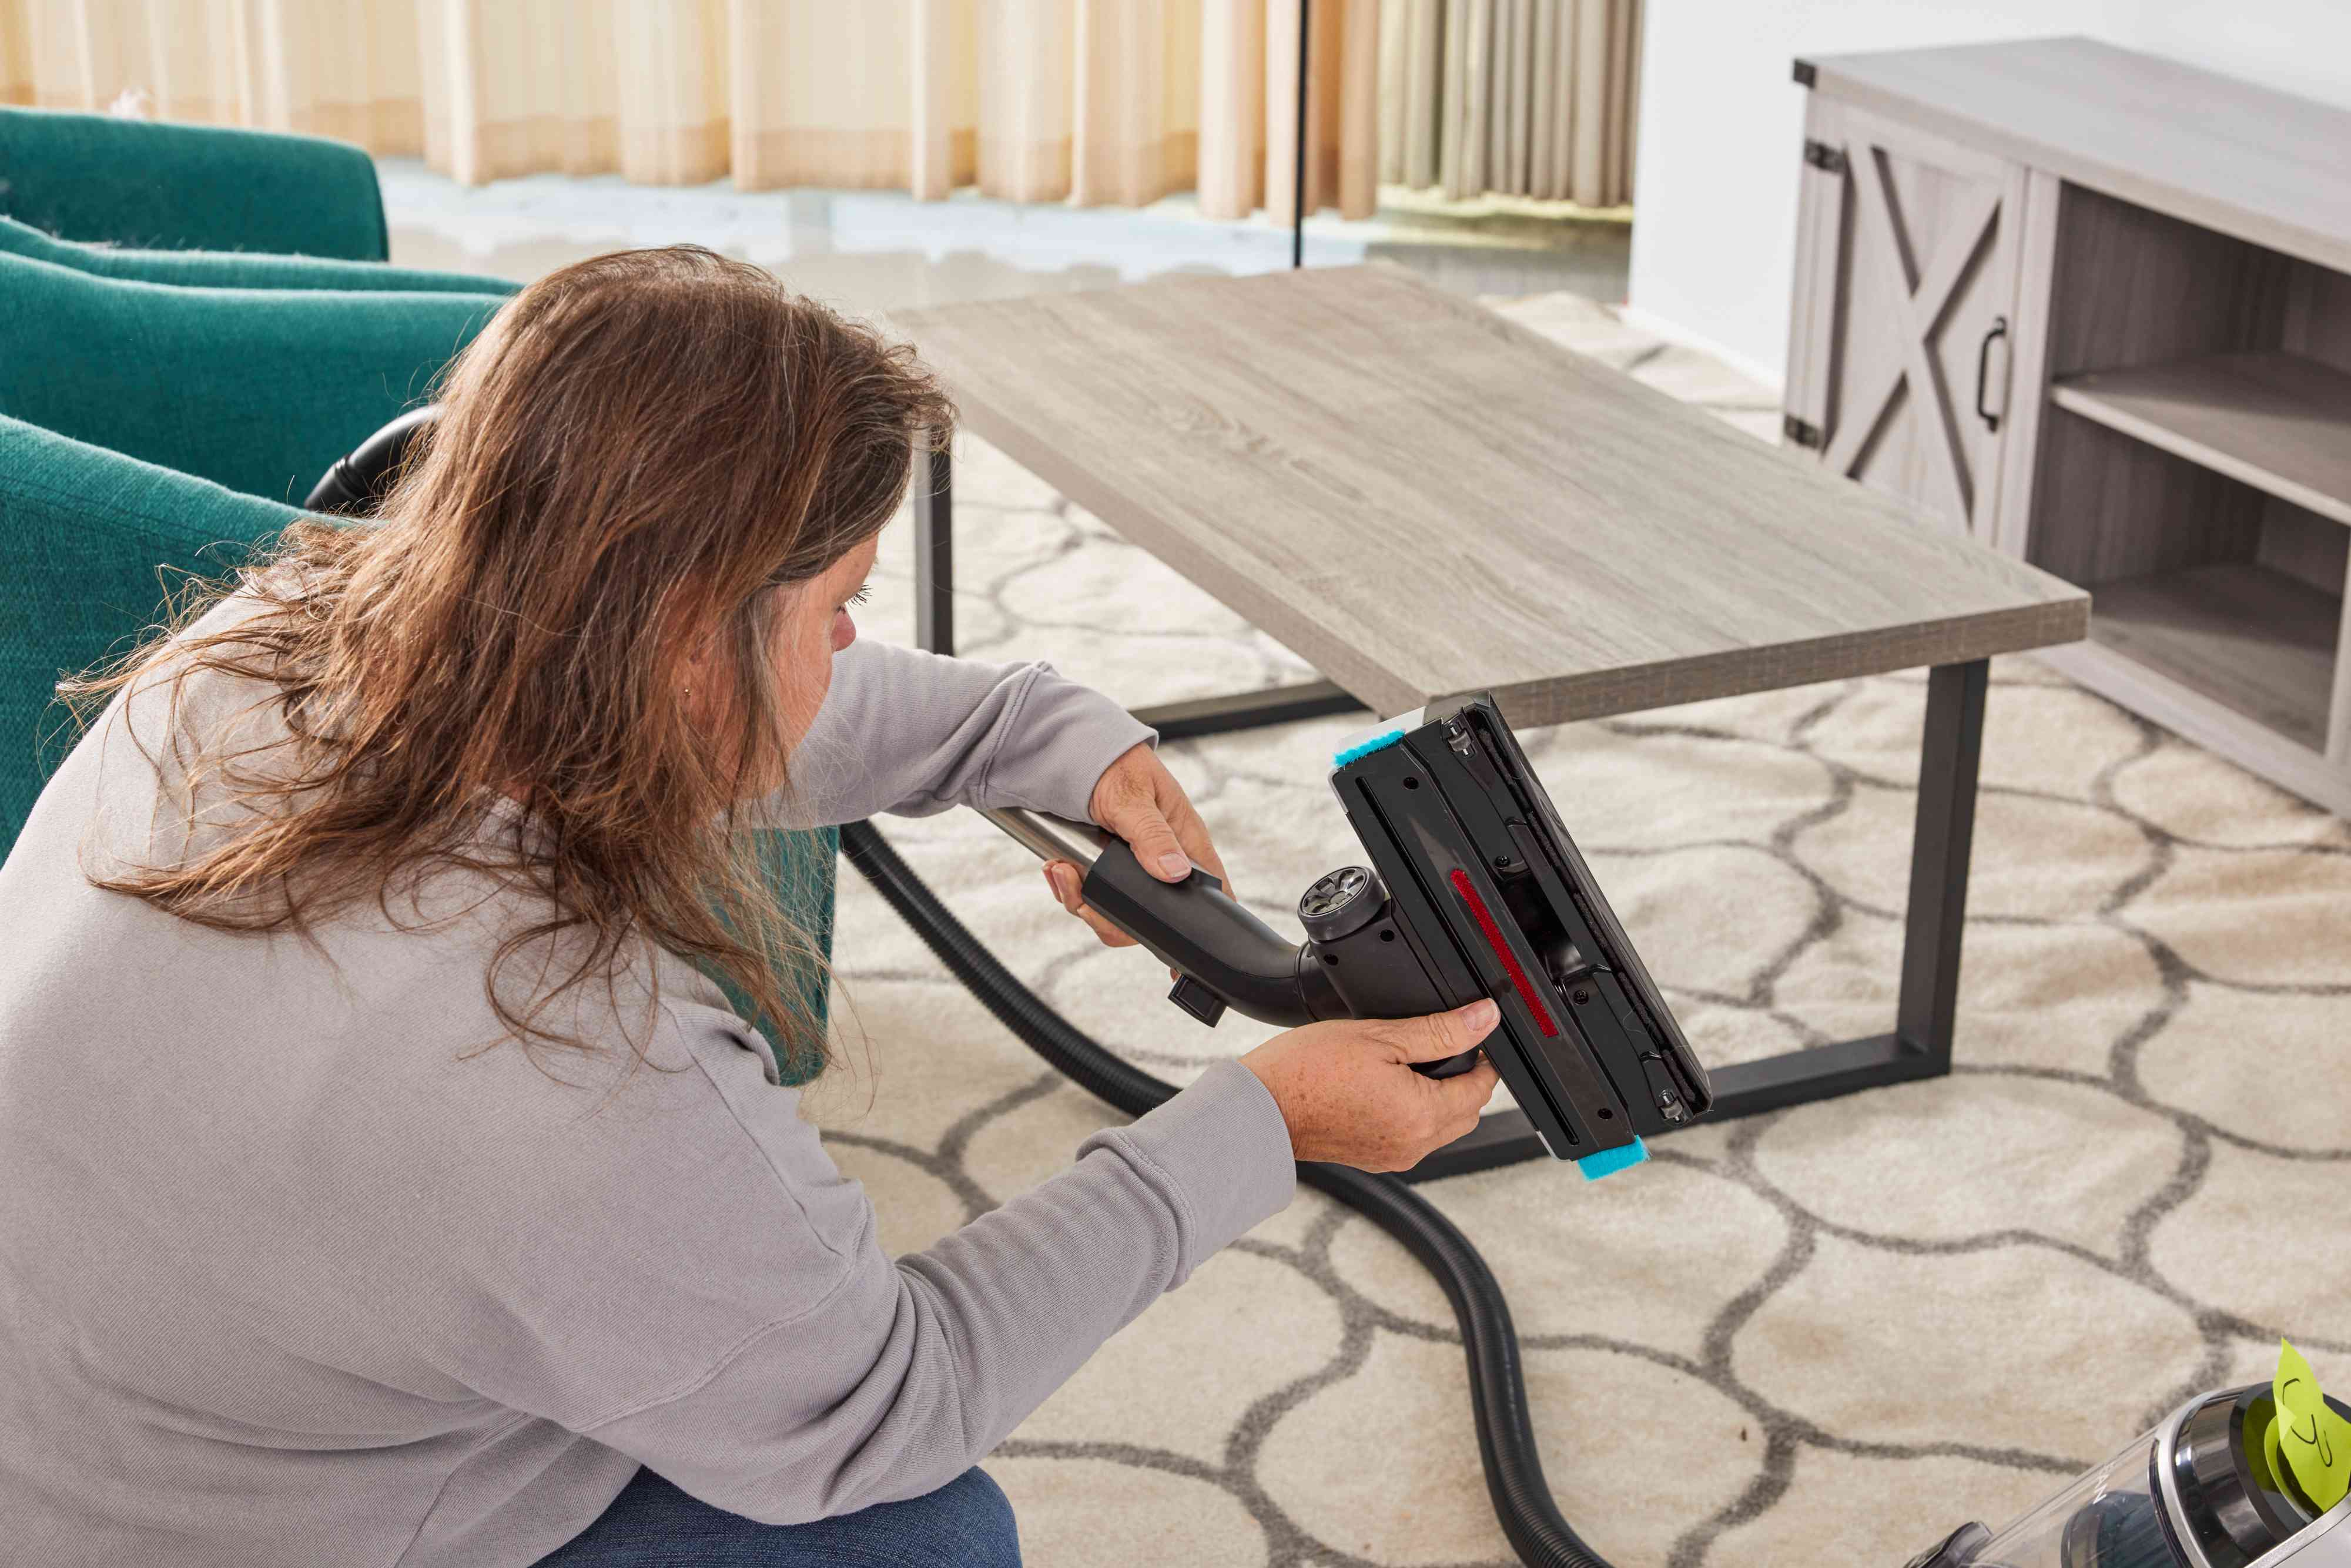 A person assembles the Bissell SmartClean Canister Vacuum